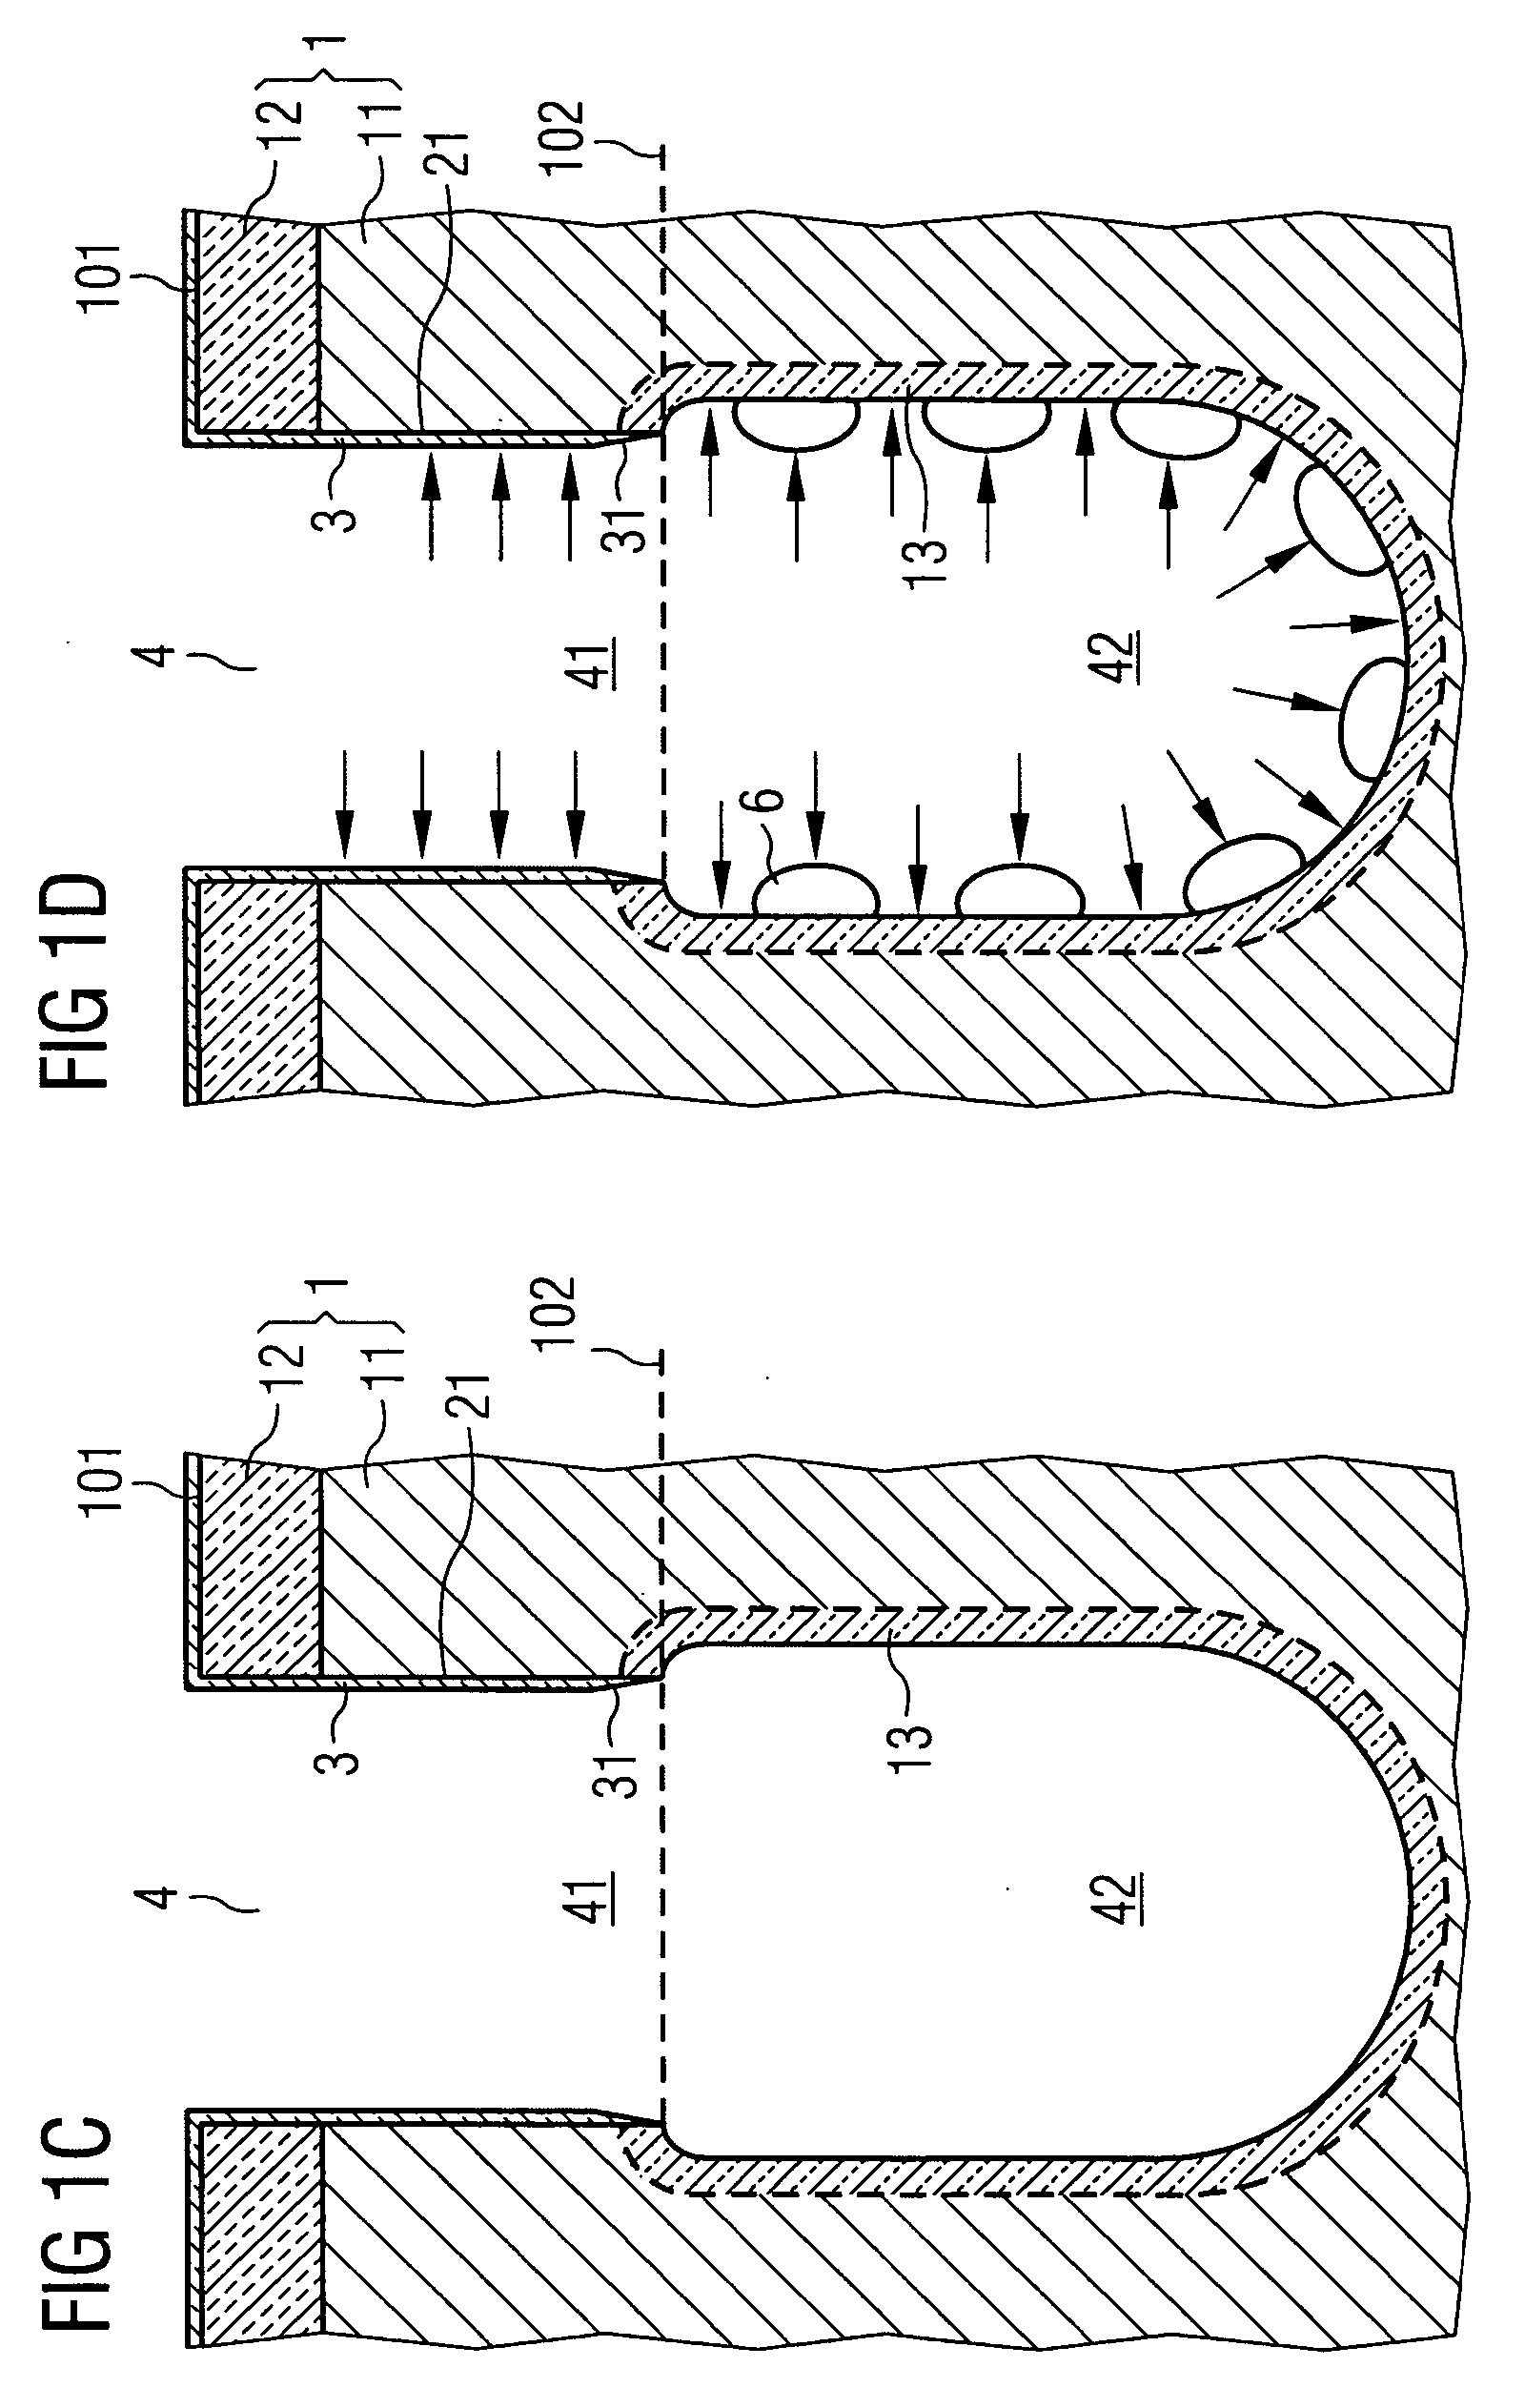 Process for vertically patterning substrates in semiconductor process technology by means of inconformal deposition